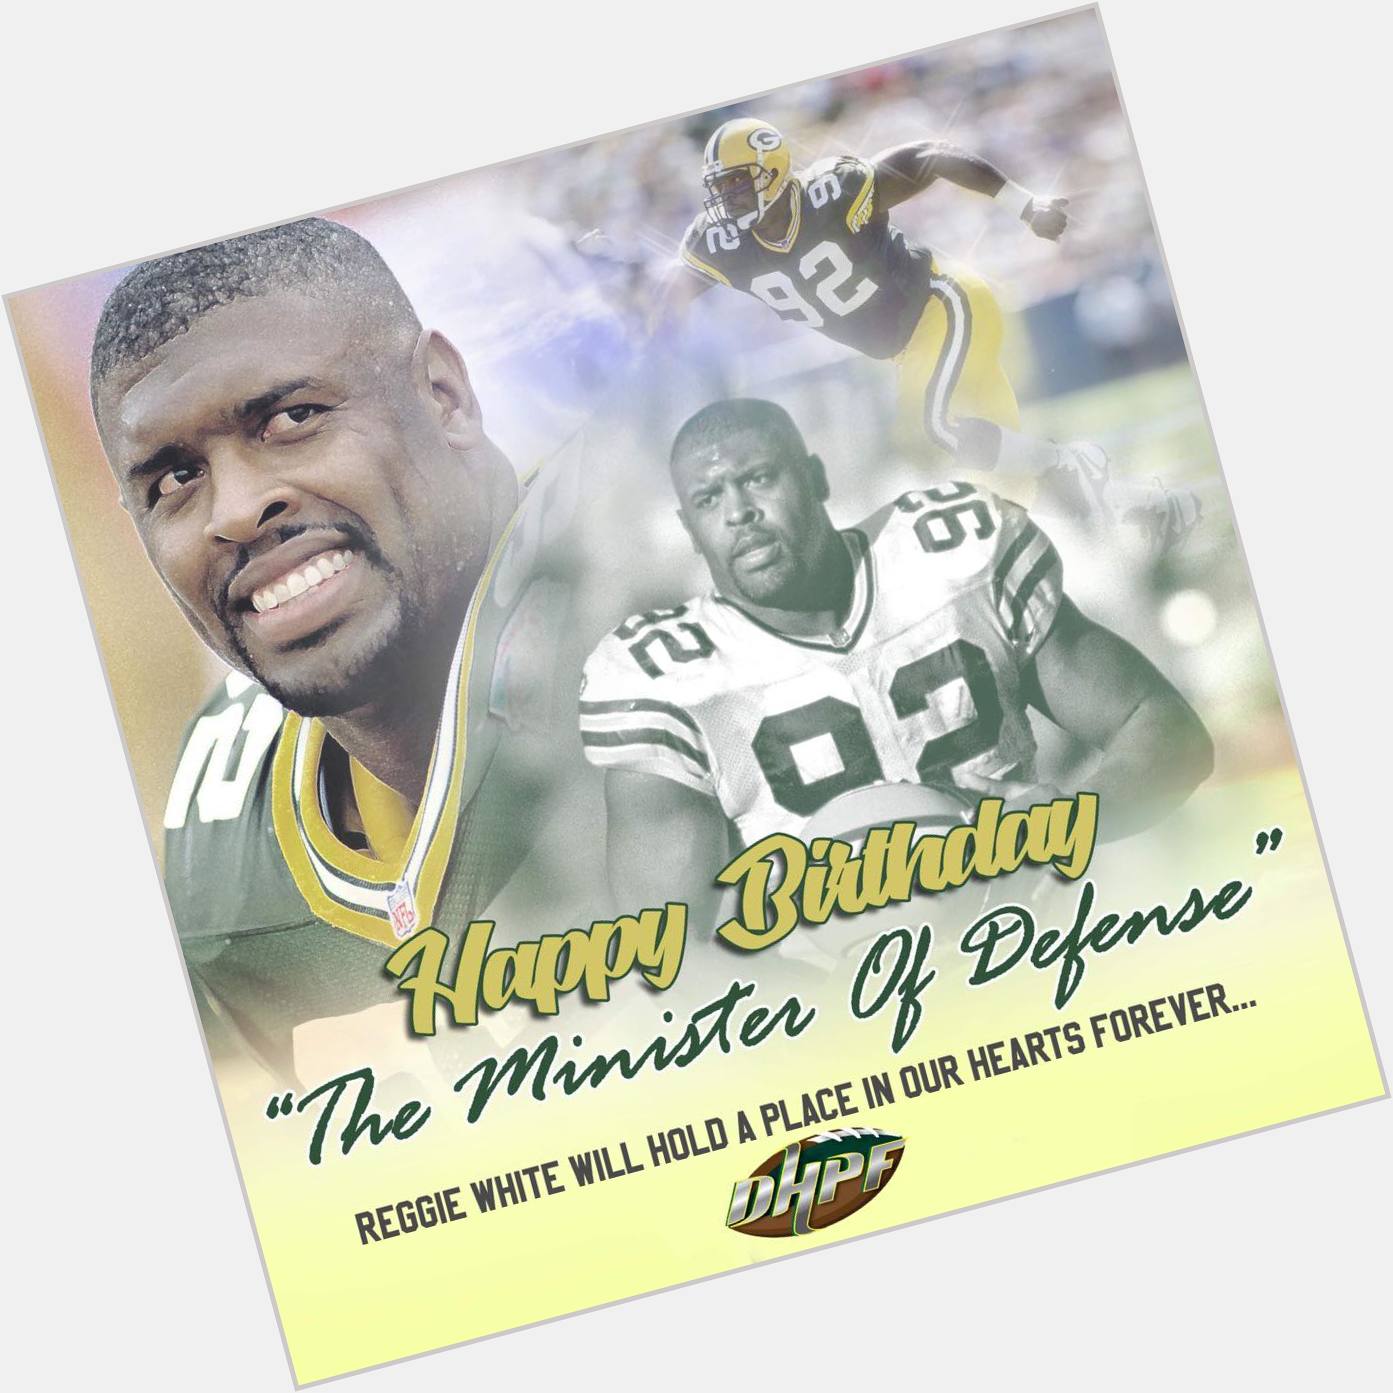 Happy heavenly birthday to Reggie White AKA the minister of defense and of course Reggie Clause. 